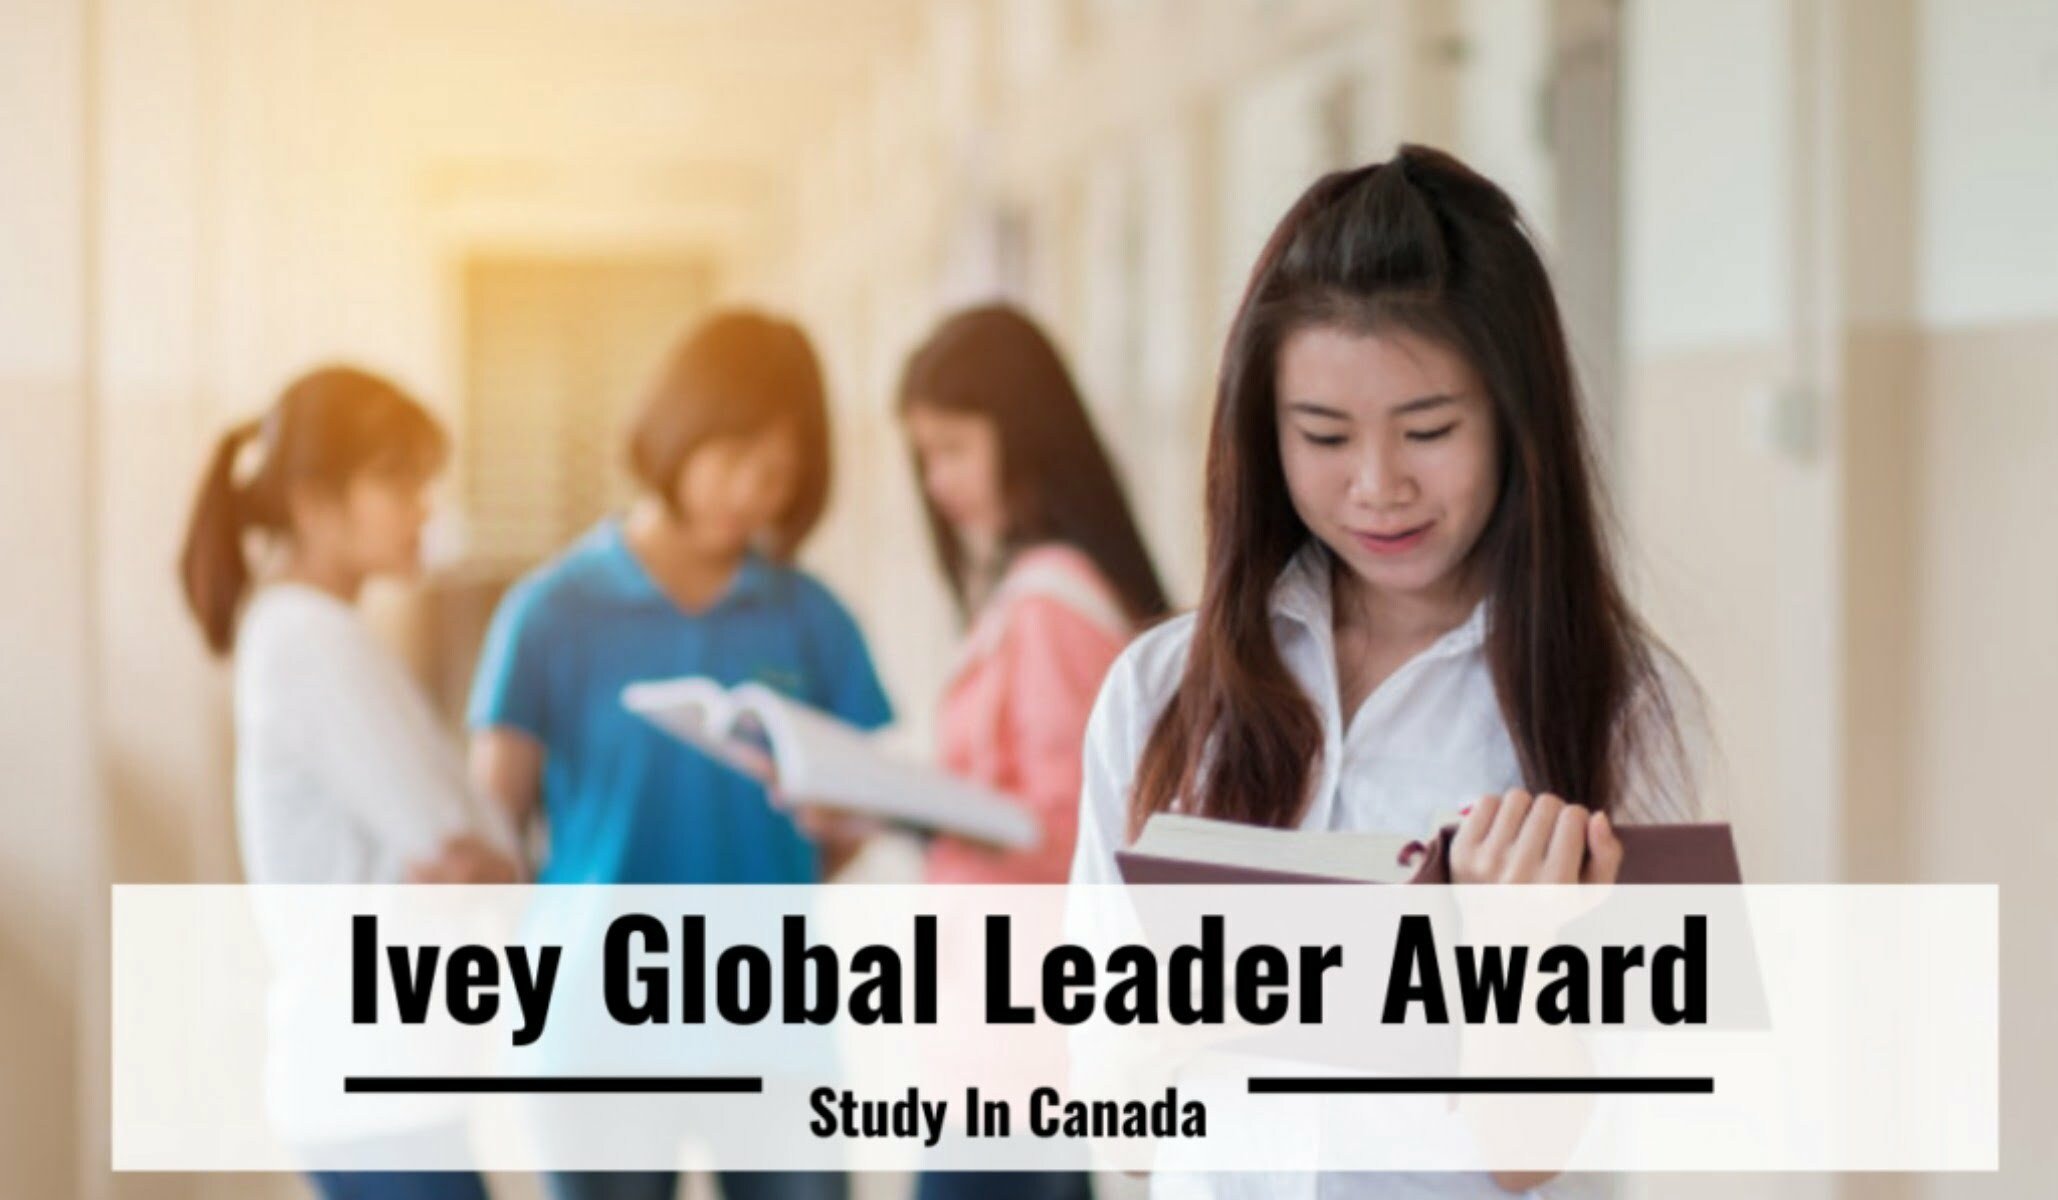 Ivey Global Leader Scholarship Award 2023 at Ivey University in Canada